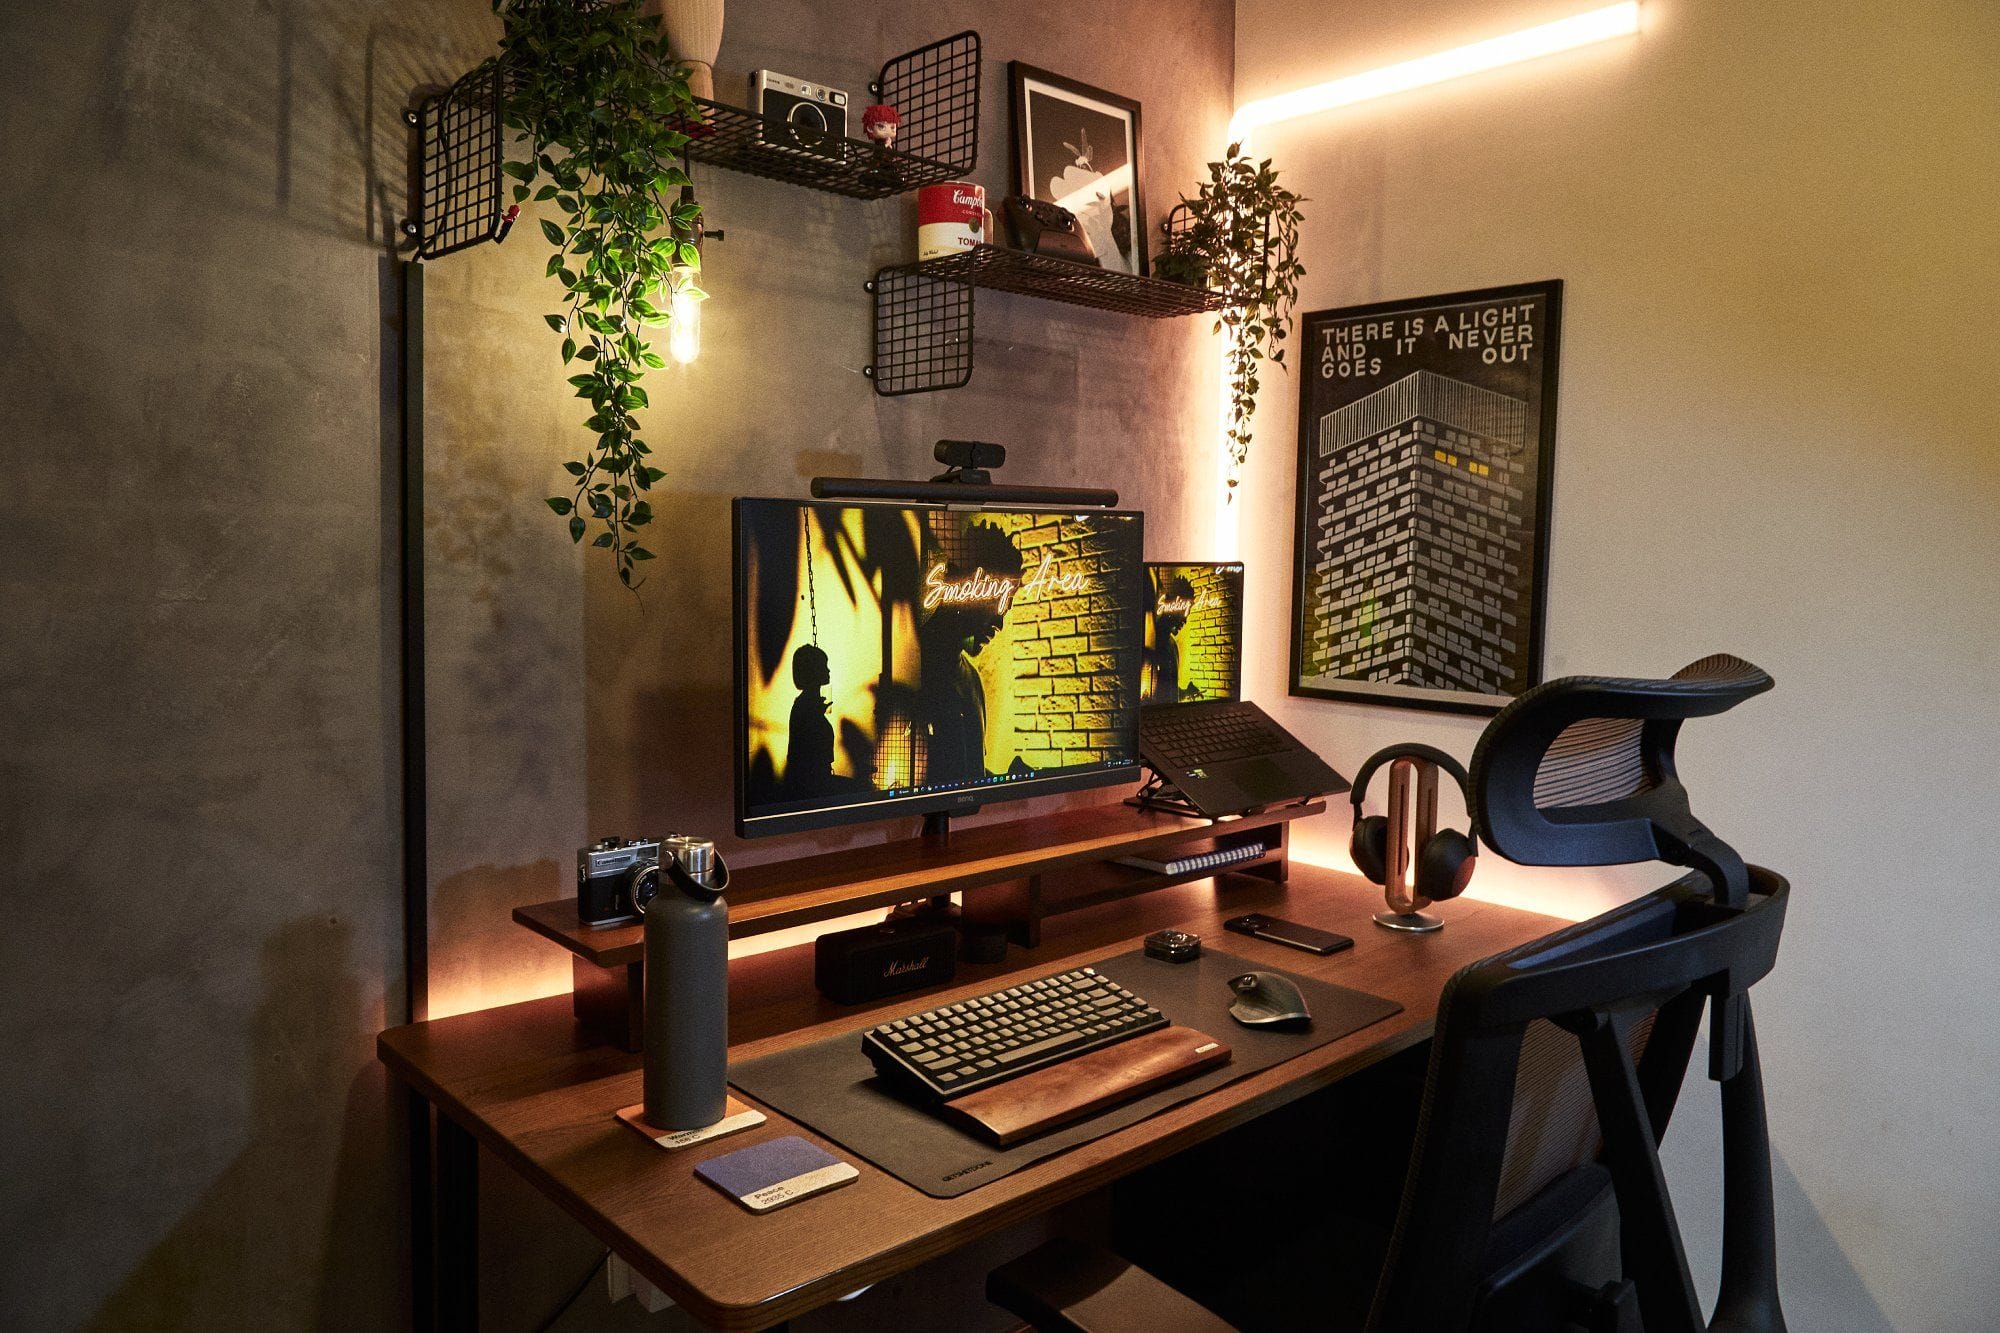 An industrial home office setup with limewash paint on the walls